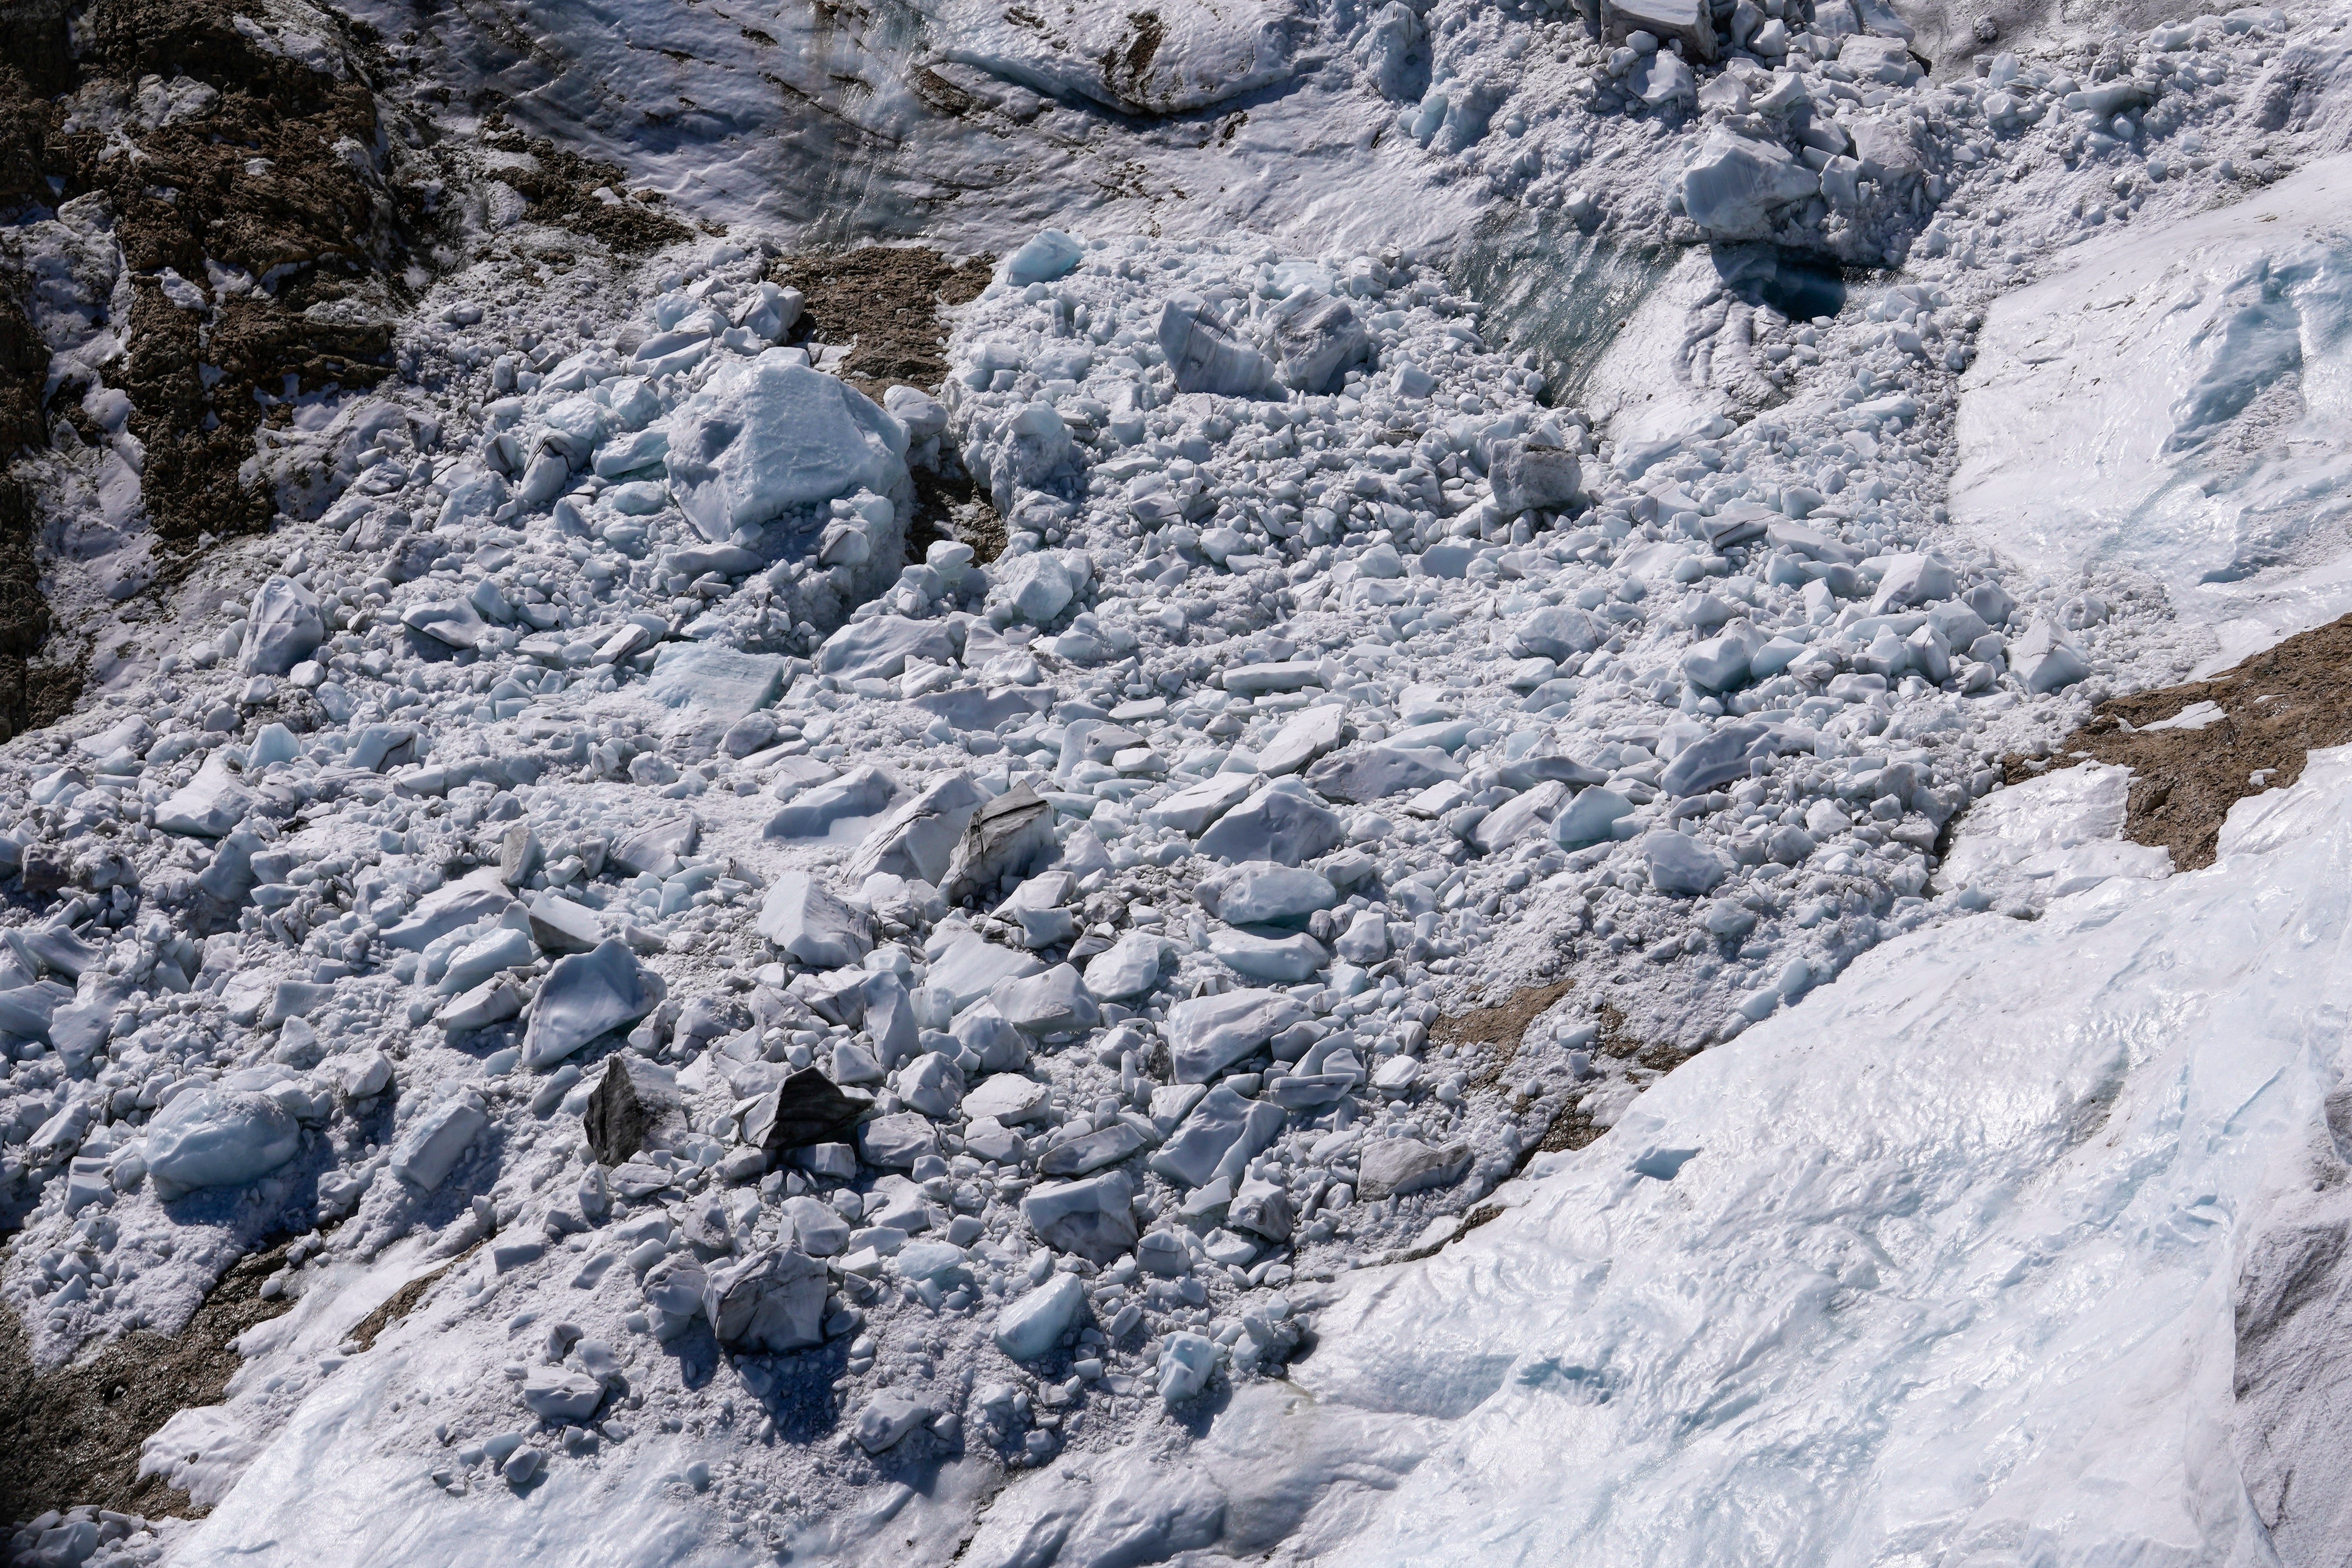 Debris and chunks of ice from the avalanche. (Photo: Luca Bruno, AP)